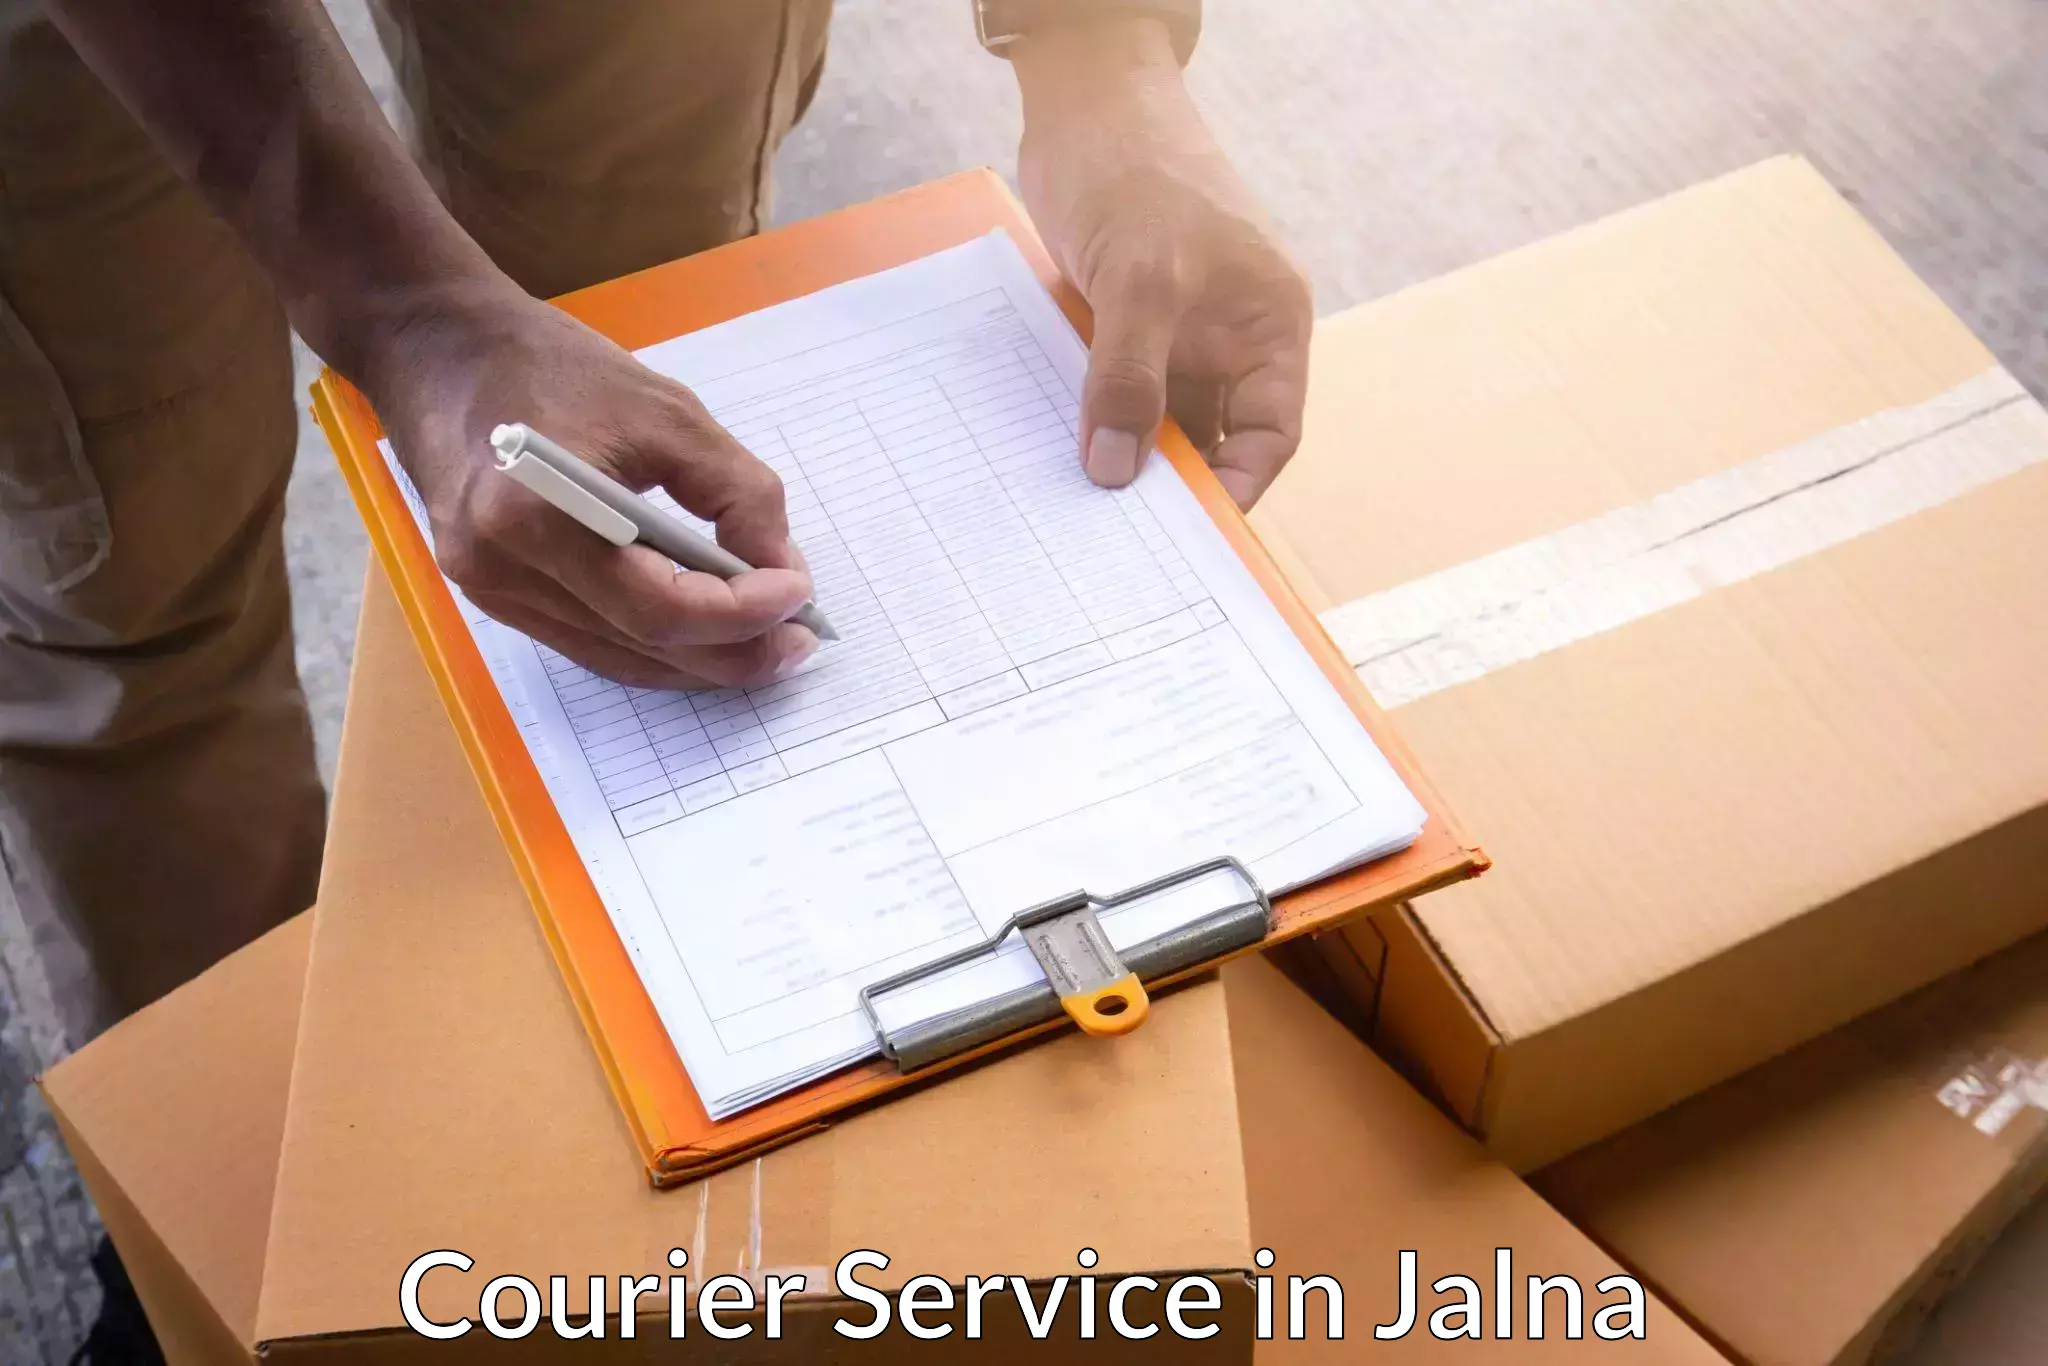 Multi-national courier services in Jalna